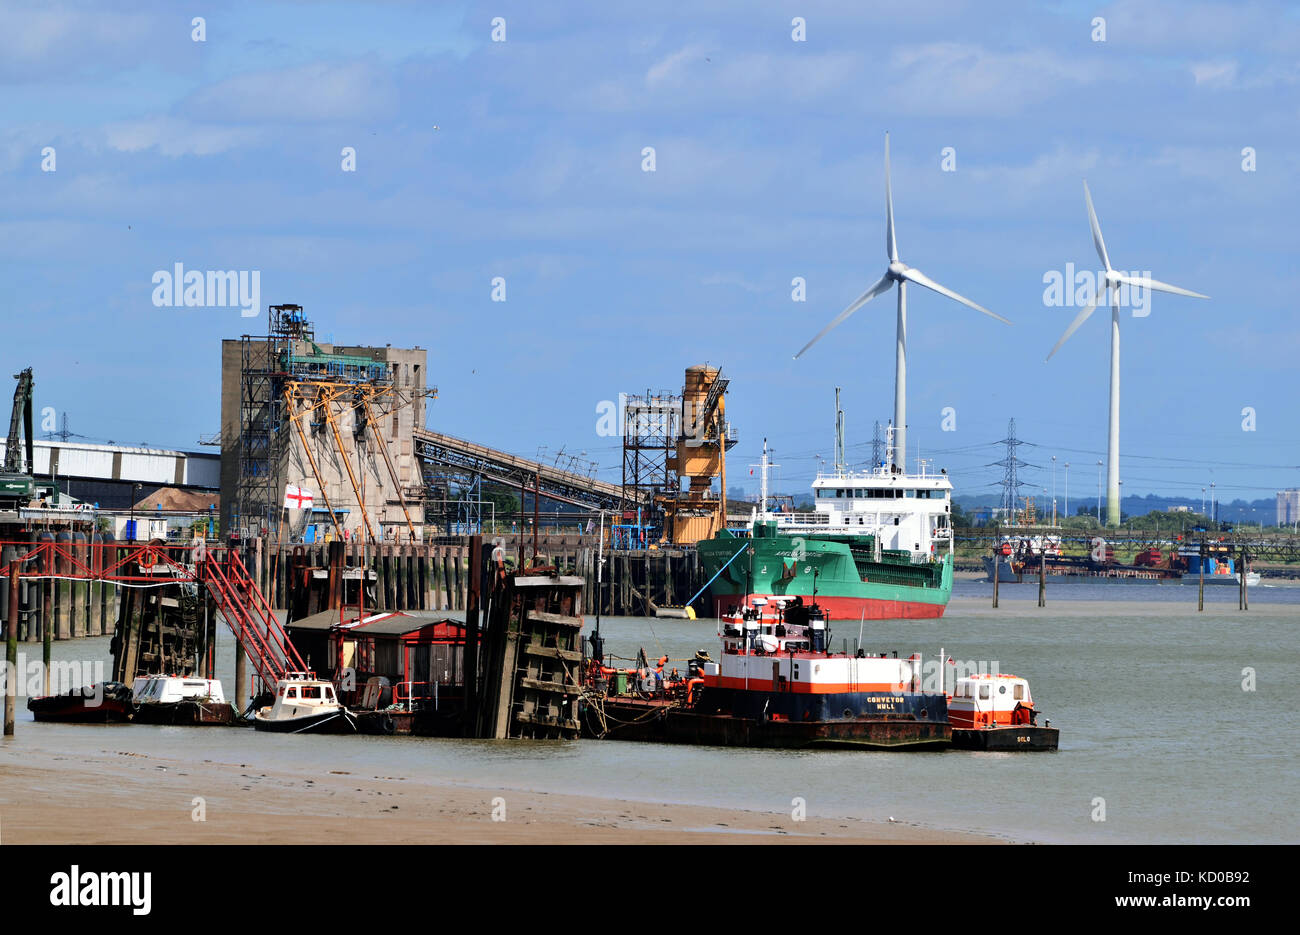 ADM Ltd oil and food processing plant adjacent to the River Thames with ship moored at dock and two wind turbines in background Stock Photo